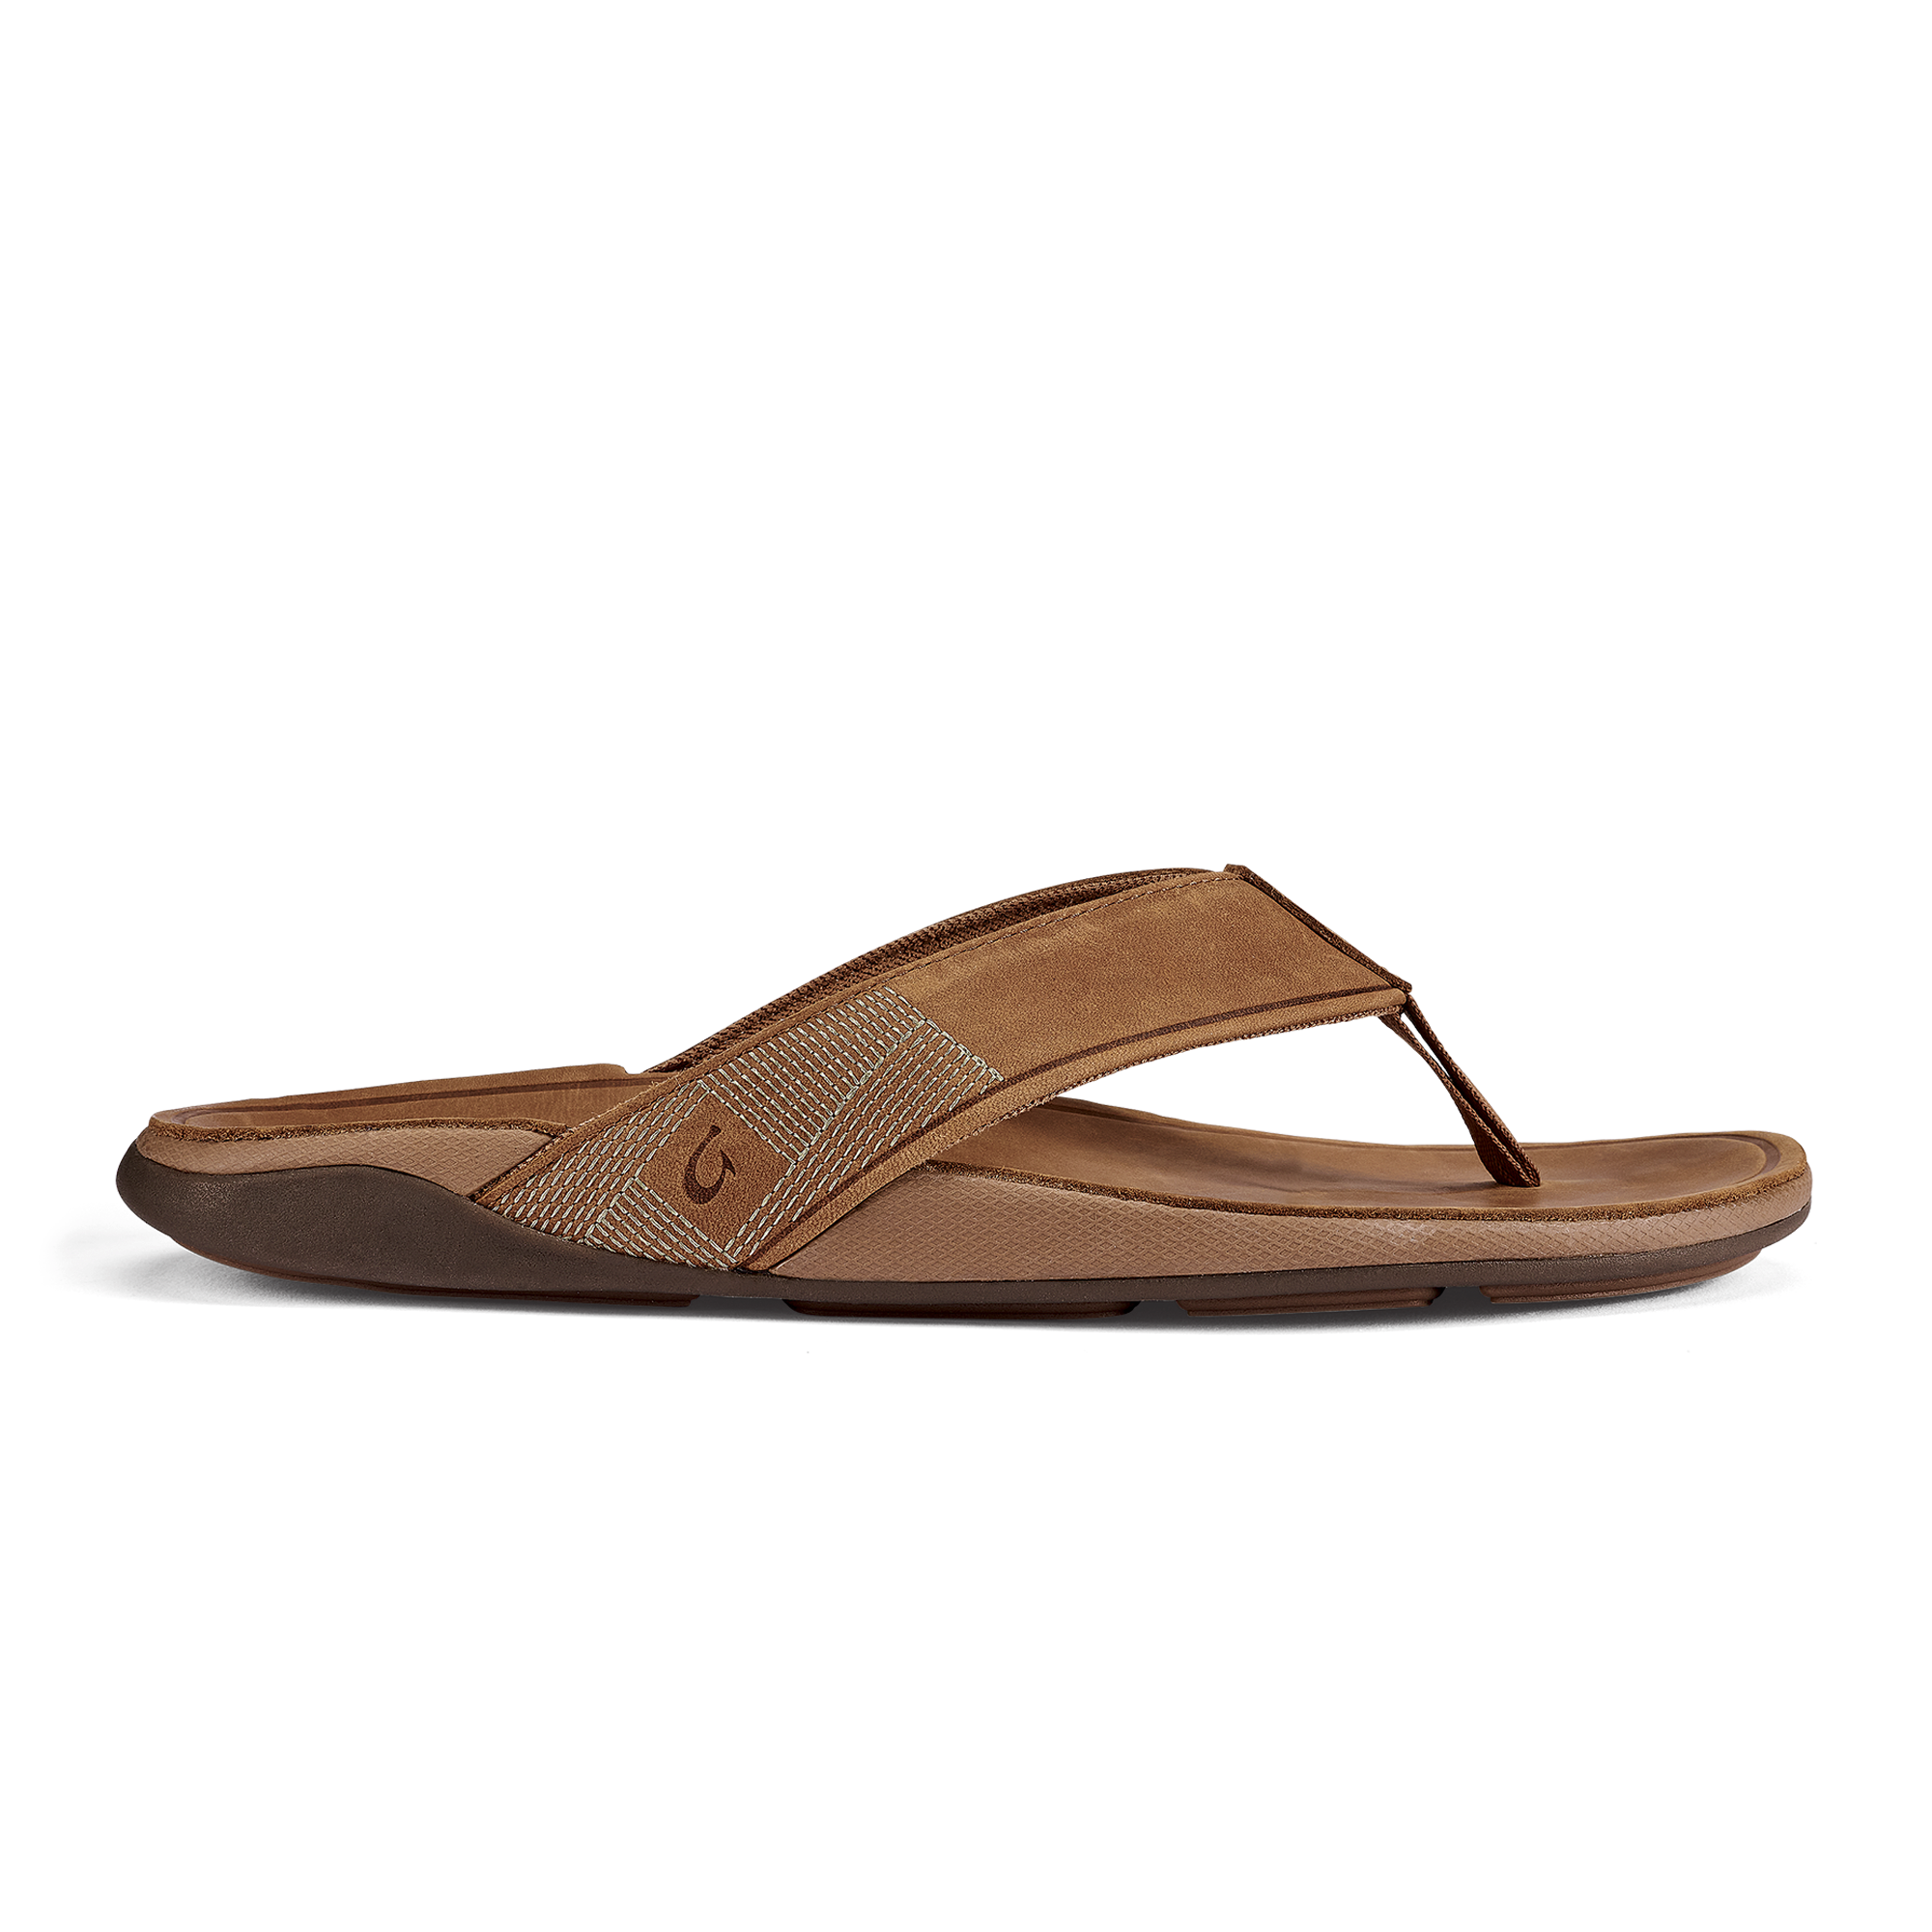 Olukai Paniolo Women's Beach Flip-Flop Sandals Distressed Full-Grain  Leather 10 Brown - $52 (42% Off Retail) - From Michelle